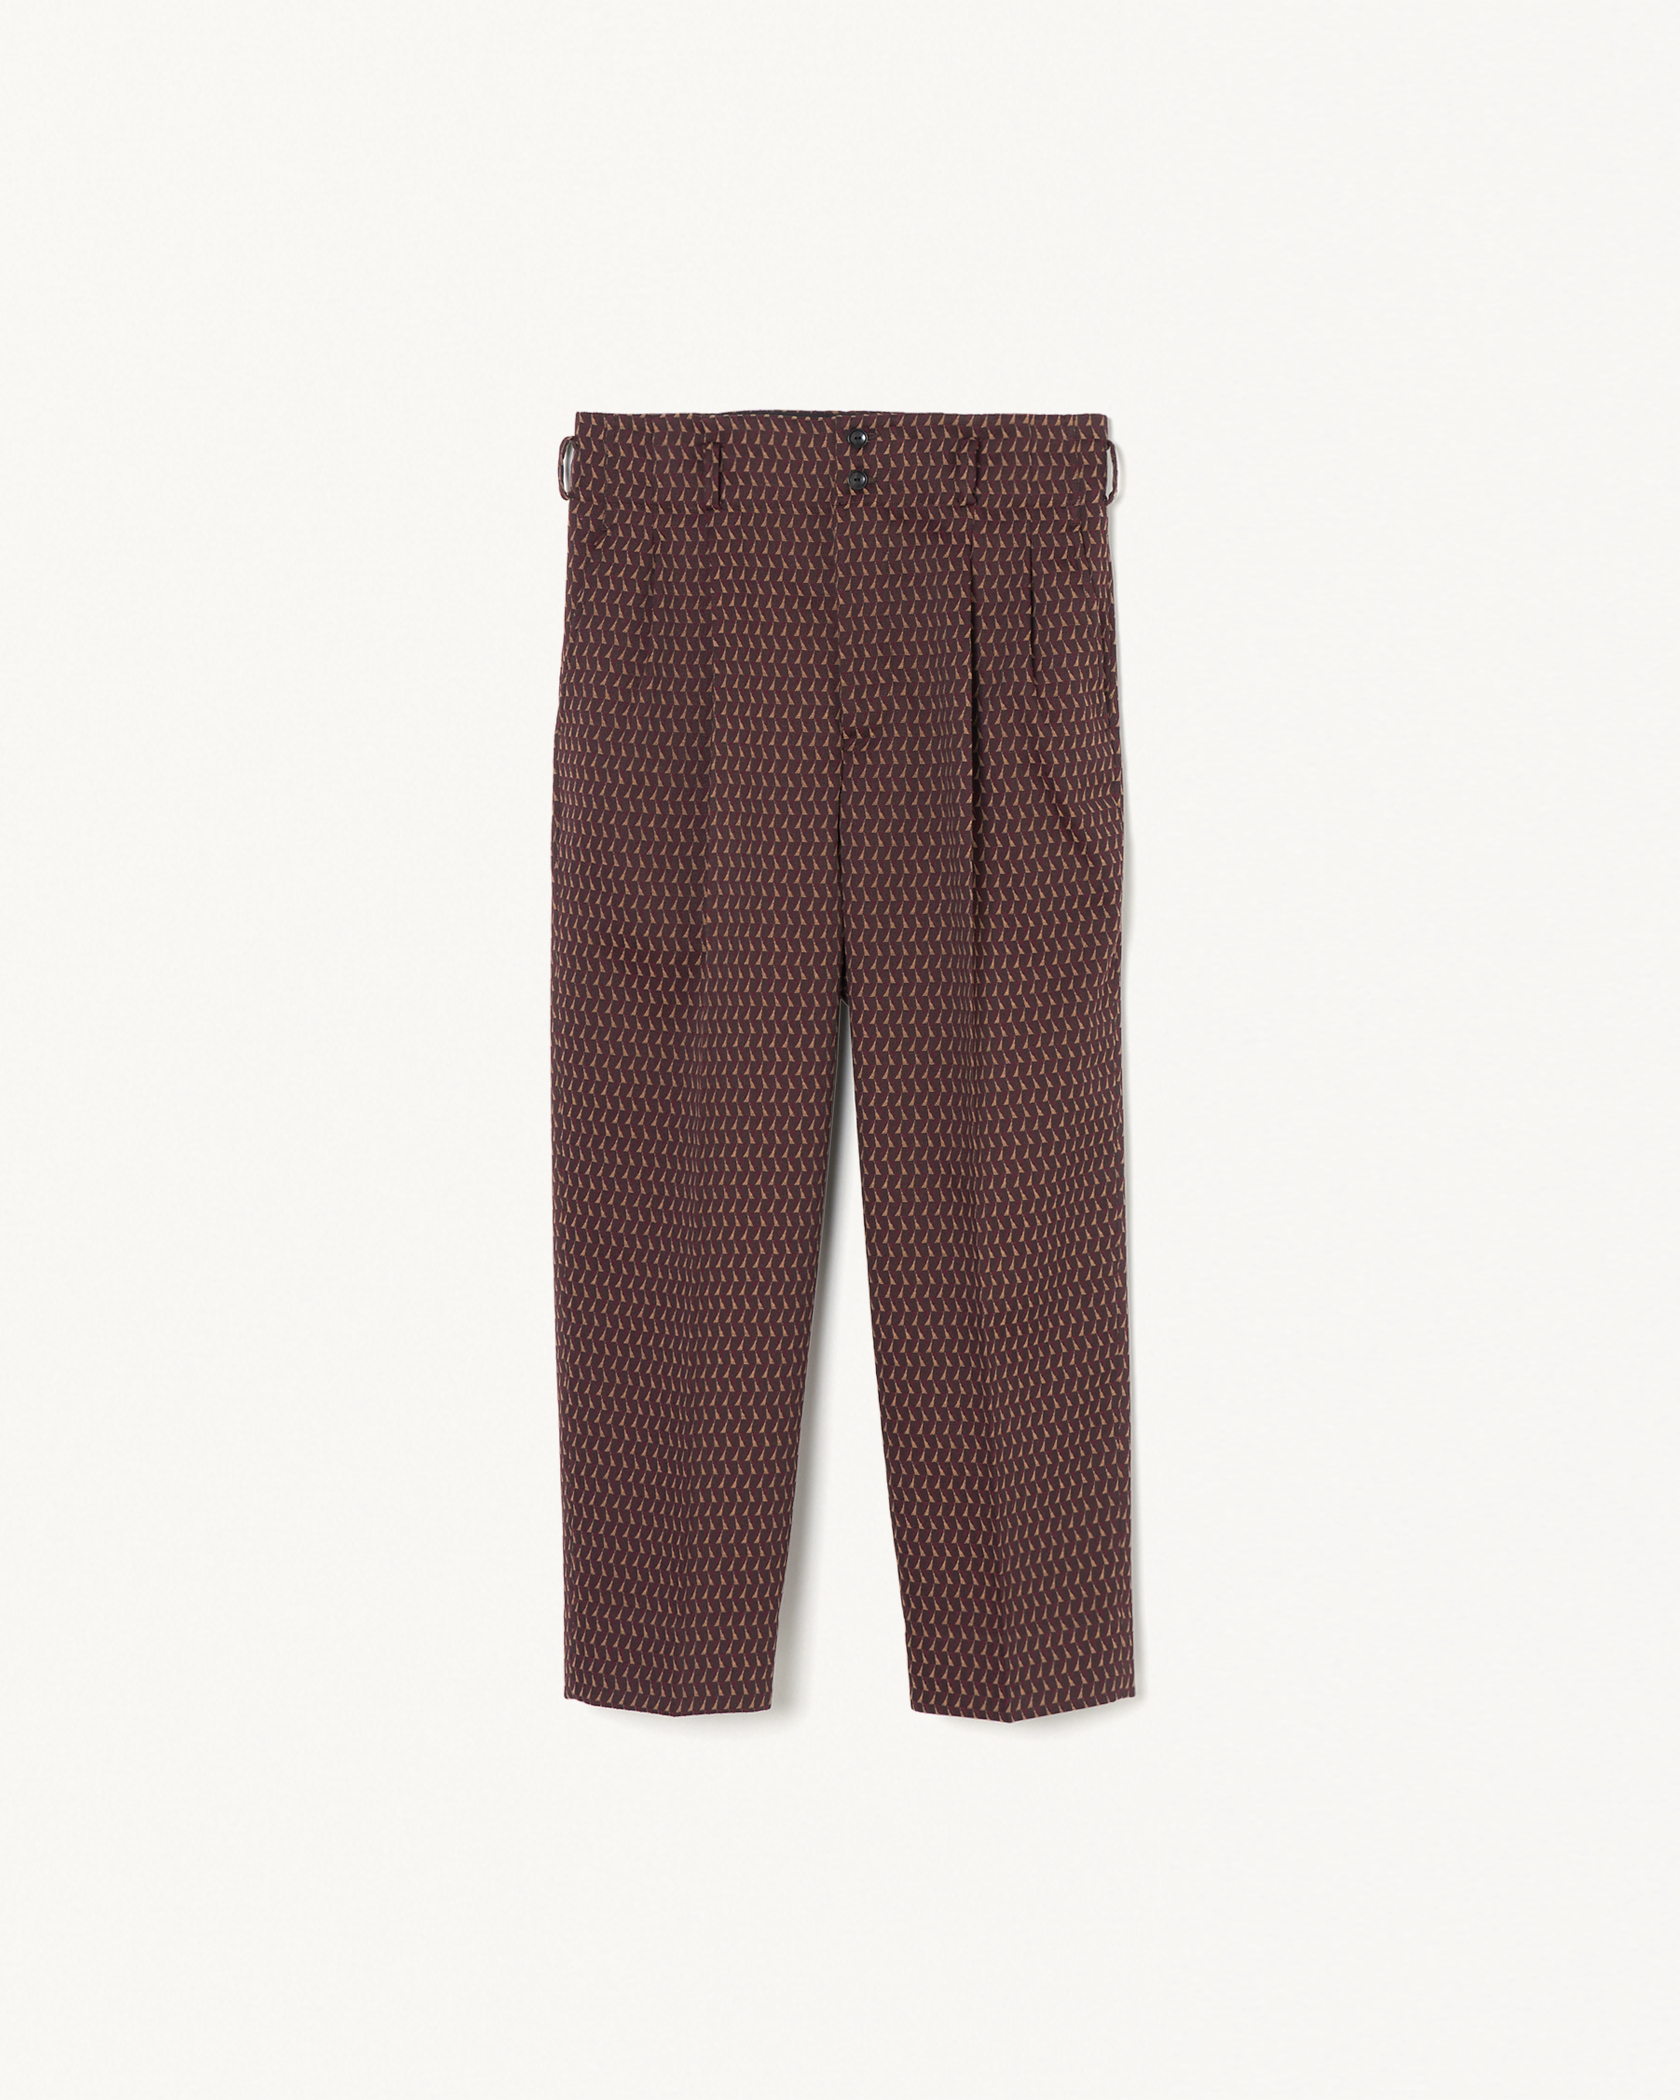 GIO WIDE TROUSERS 詳細画像 Brown×Wine 11